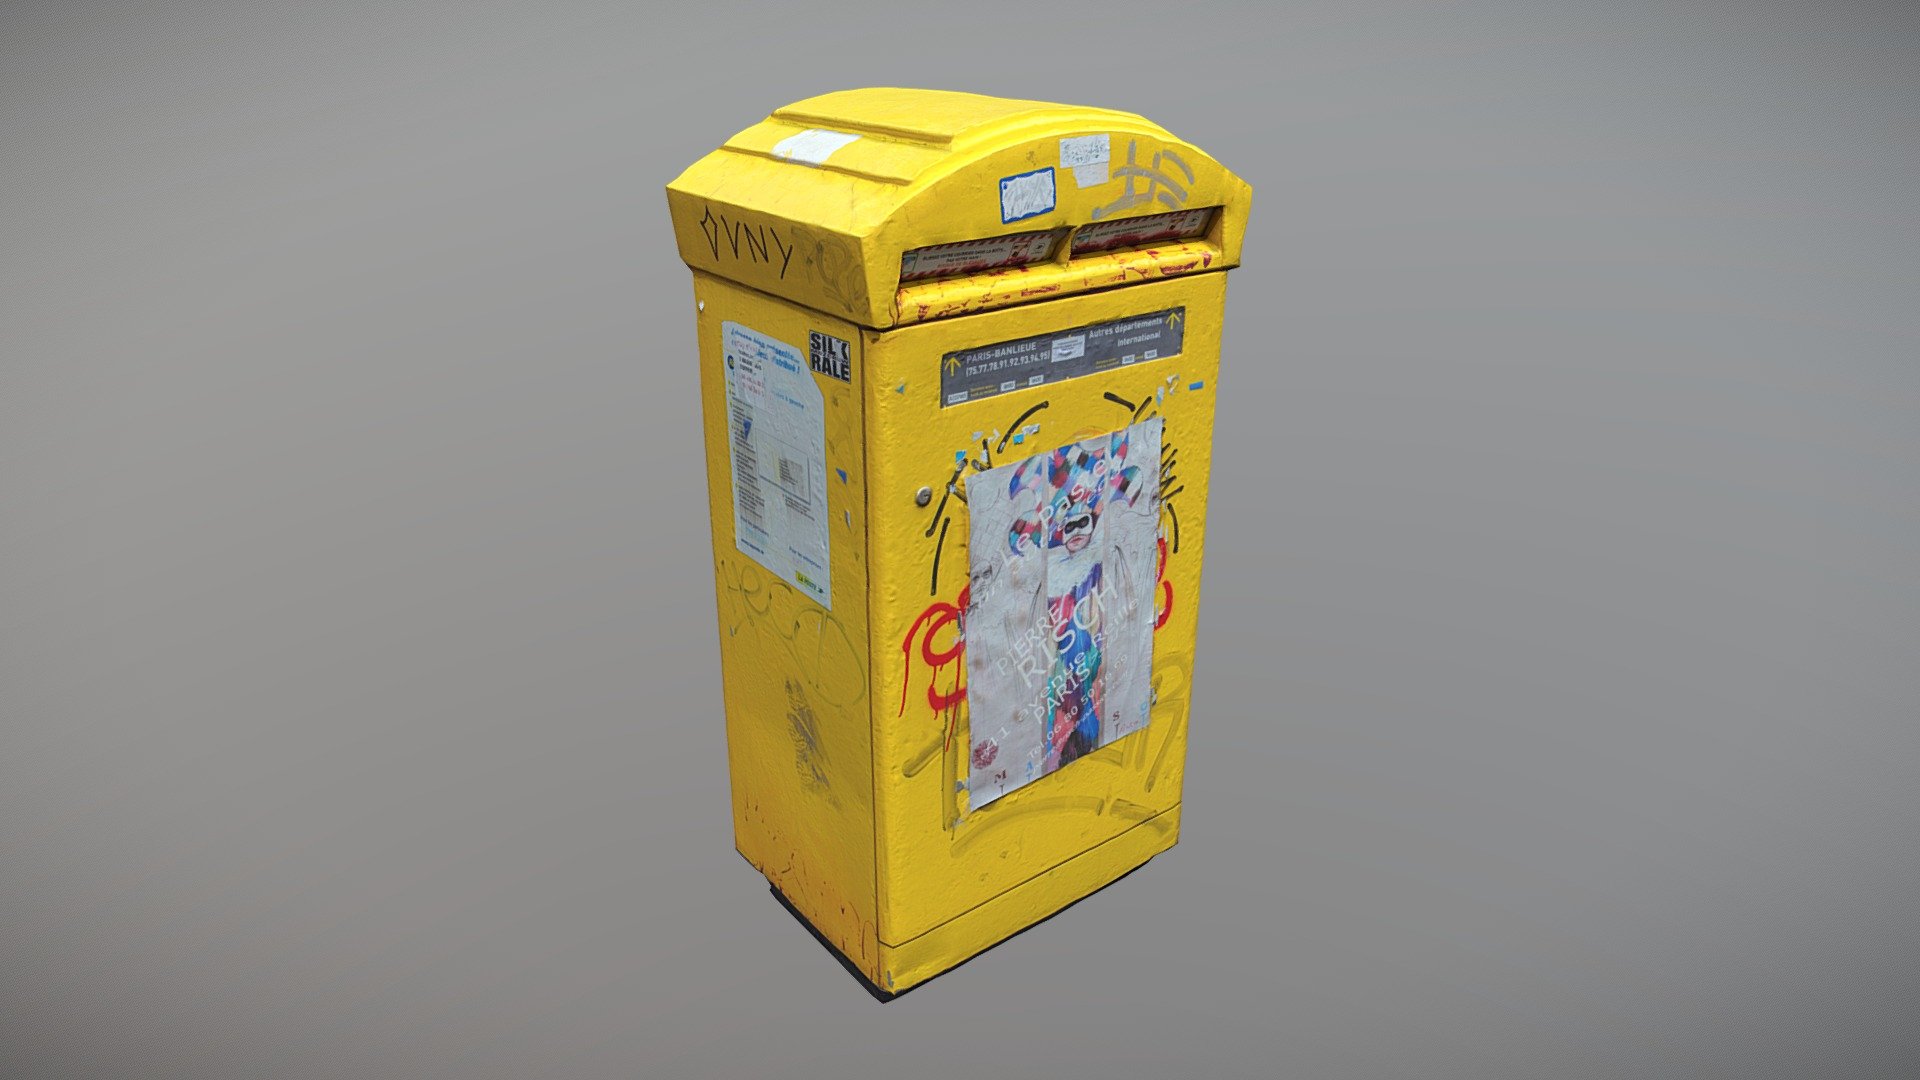 Typical mailbox from France, scanned in Paris, perfect to fit in a any french street scene. Highly realistic result. 

Fairly lowpoly photoscan from a source reconstruction of 9.8 millions triangles. 

Retopologized.
4K textures (diffuse, roughness and normal) from 16K source 3d model